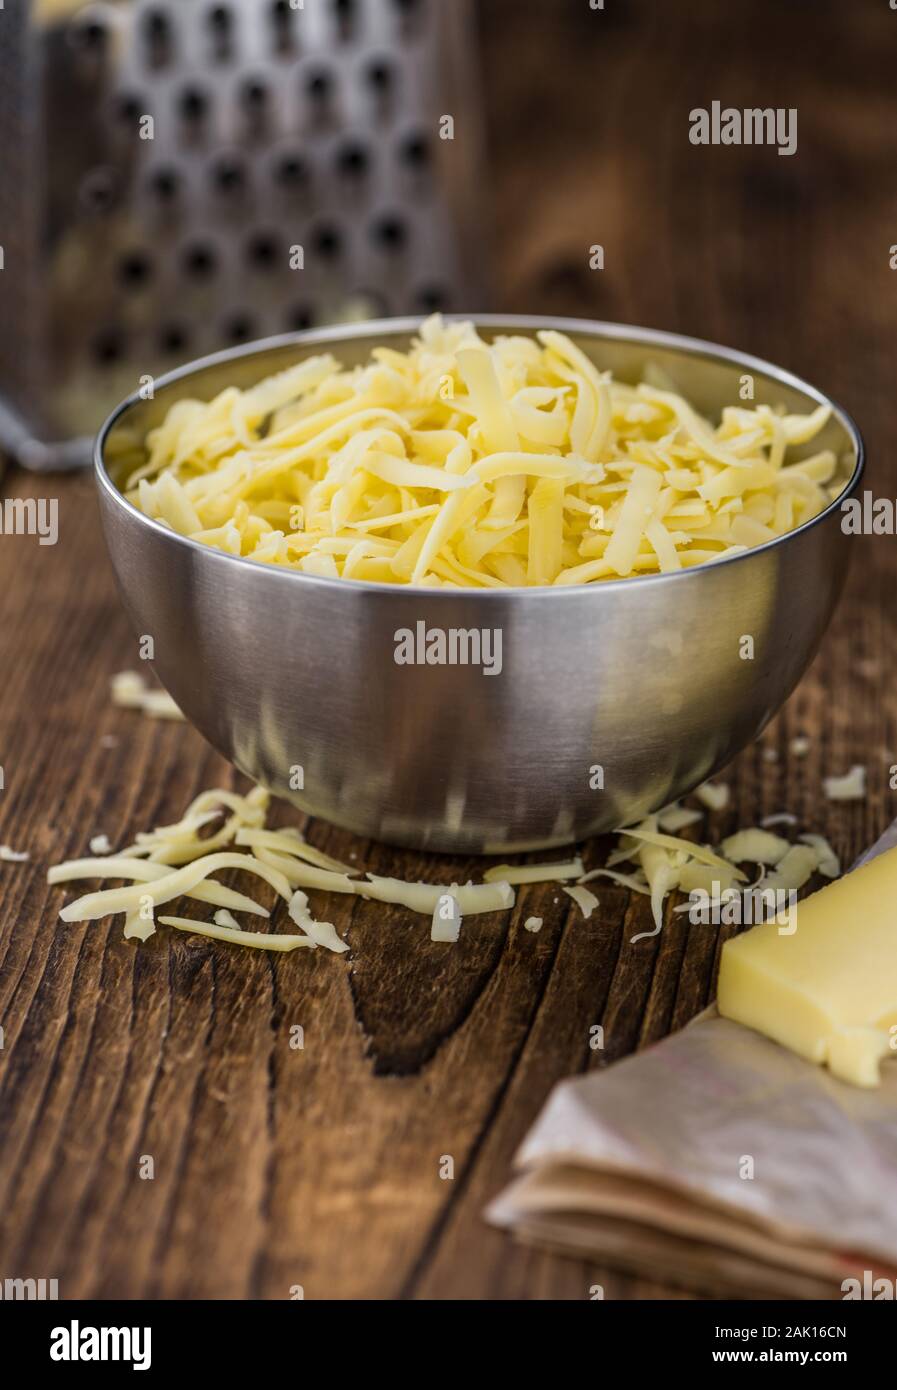 https://c8.alamy.com/comp/2AK16CN/old-wooden-table-with-grated-cheese-close-up-shot-2AK16CN.jpg